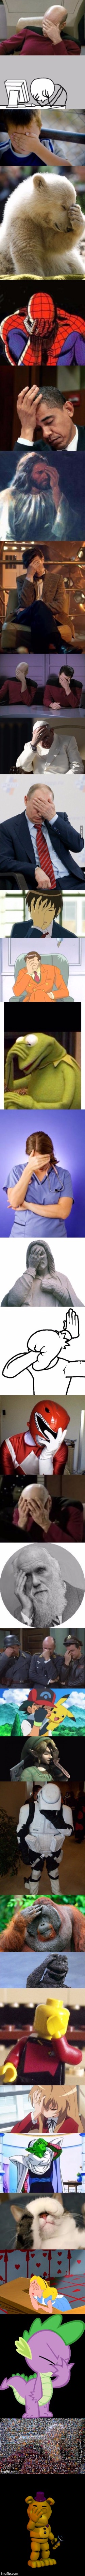 High Quality Crazy Epic Facepalm Blank Meme Template